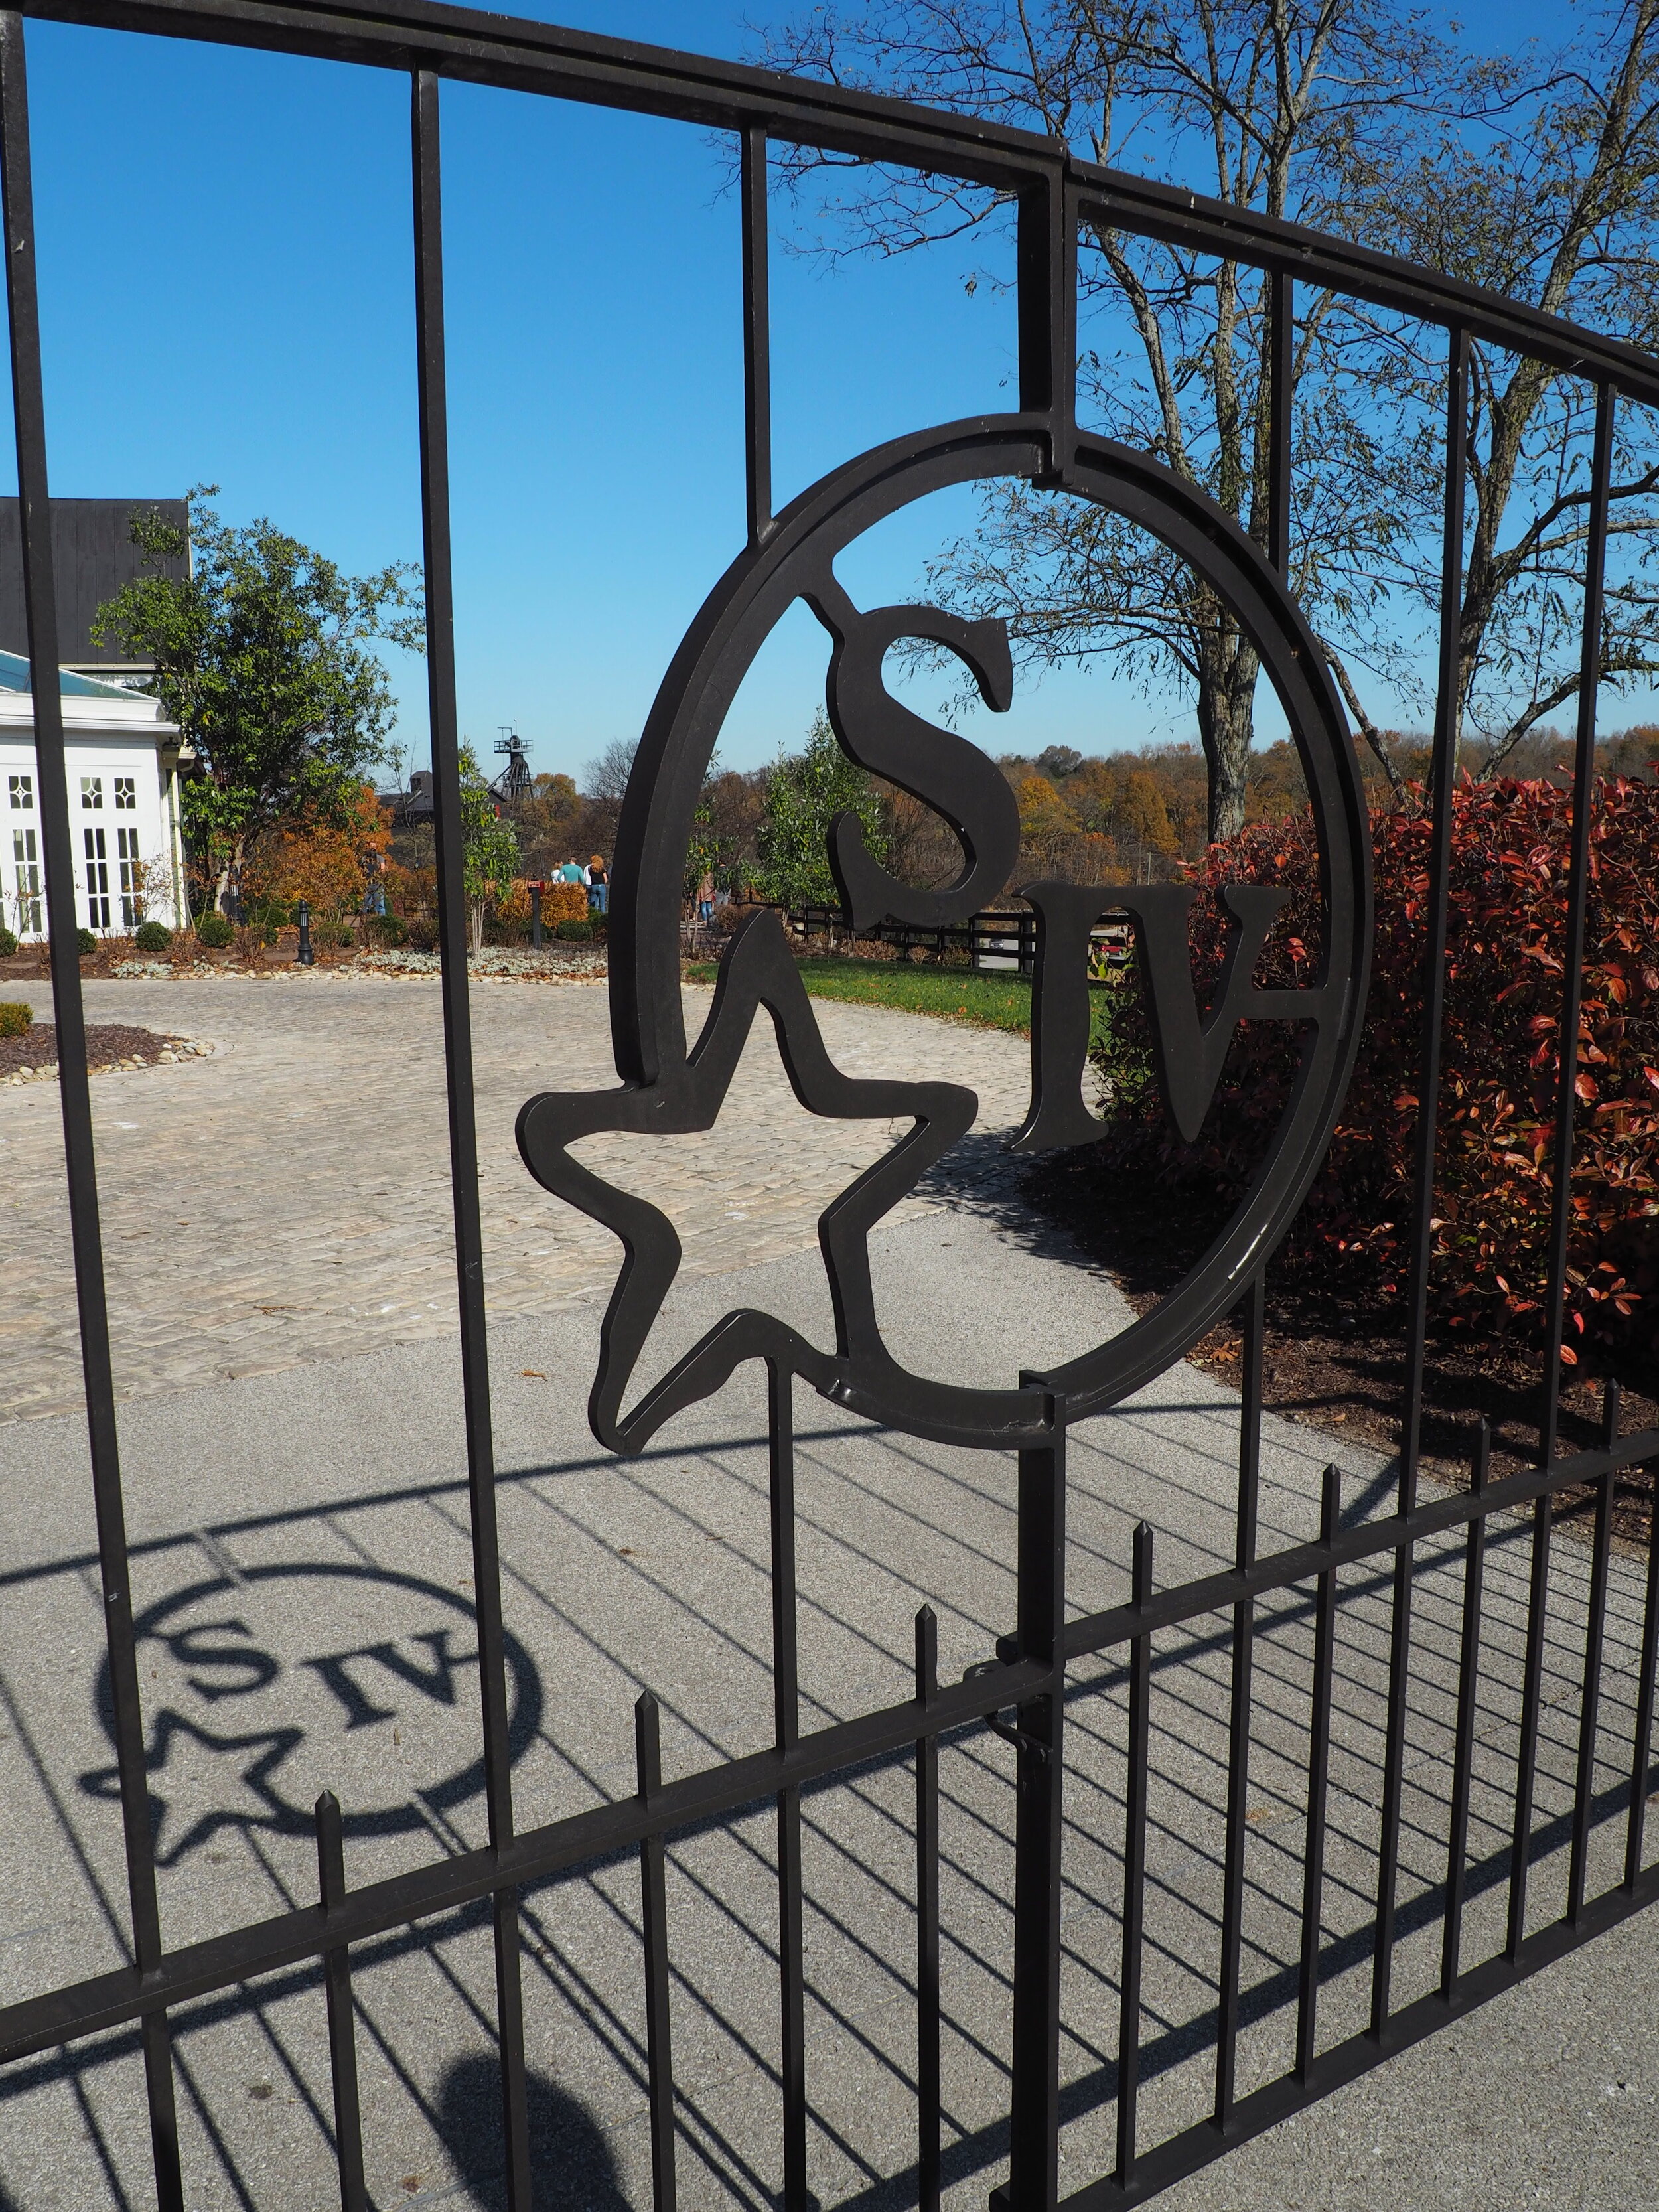 The Maker’s Mark logo where the S stands for ‘Samuels’ and IV stands for the 4th generation distiller who created this brand. The star is  for Star Hill Farm, the Bardstown farm where the Samuels family resided.